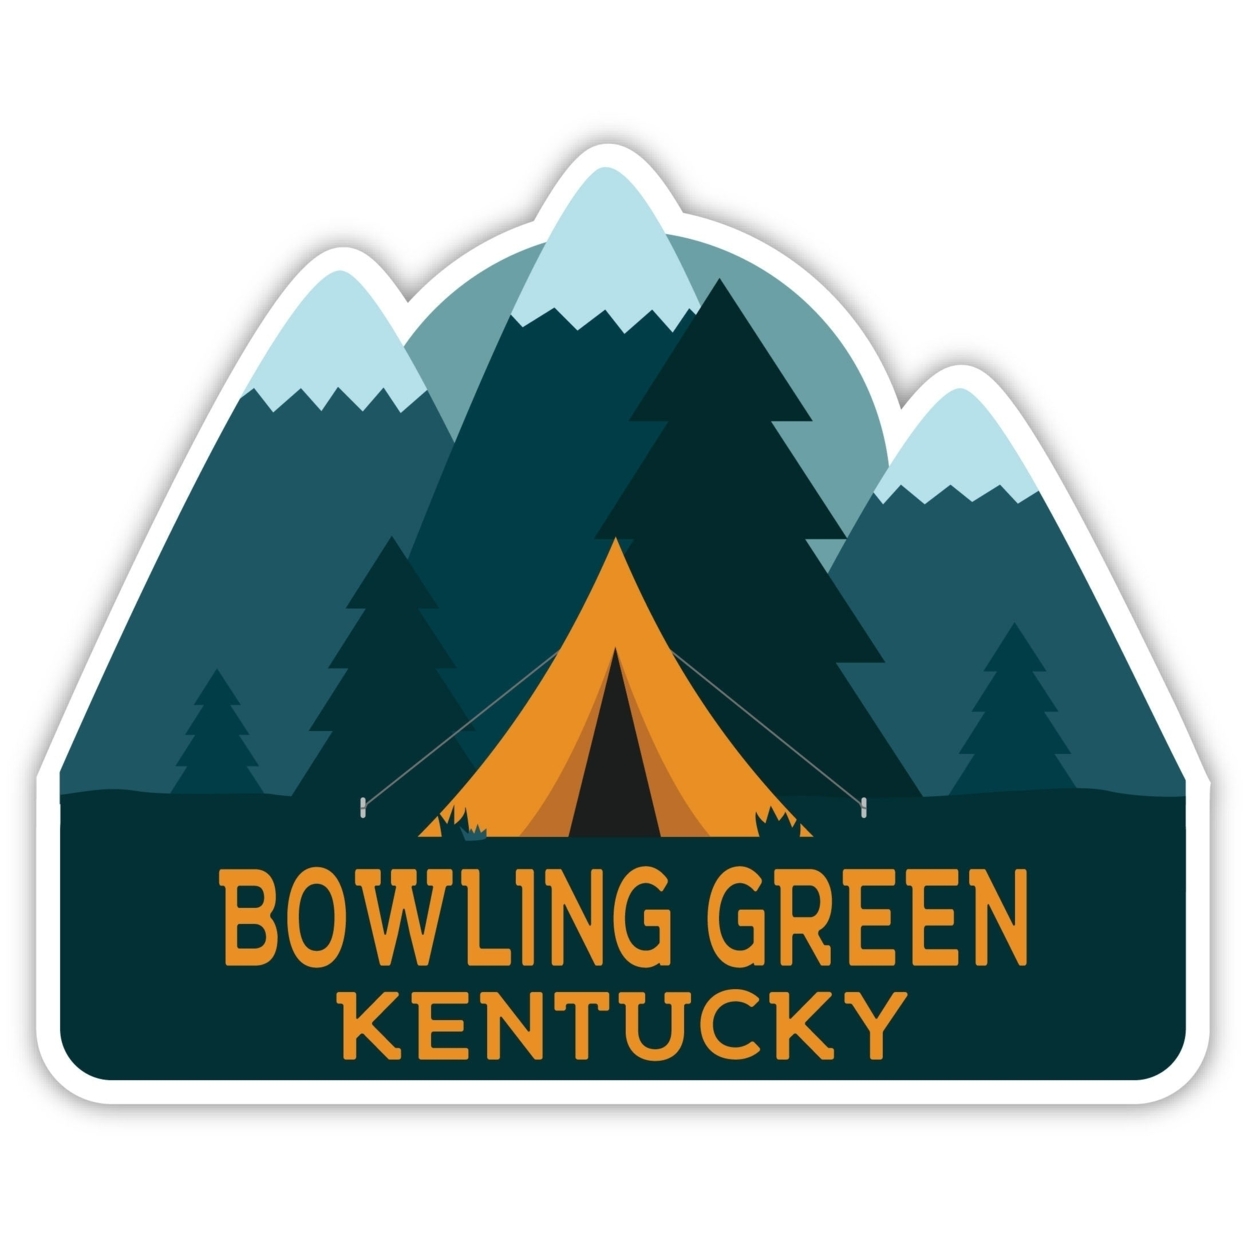 Bowling Green Kentucky Souvenir Decorative Stickers (Choose Theme And Size) - Single Unit, 8-Inch, Tent